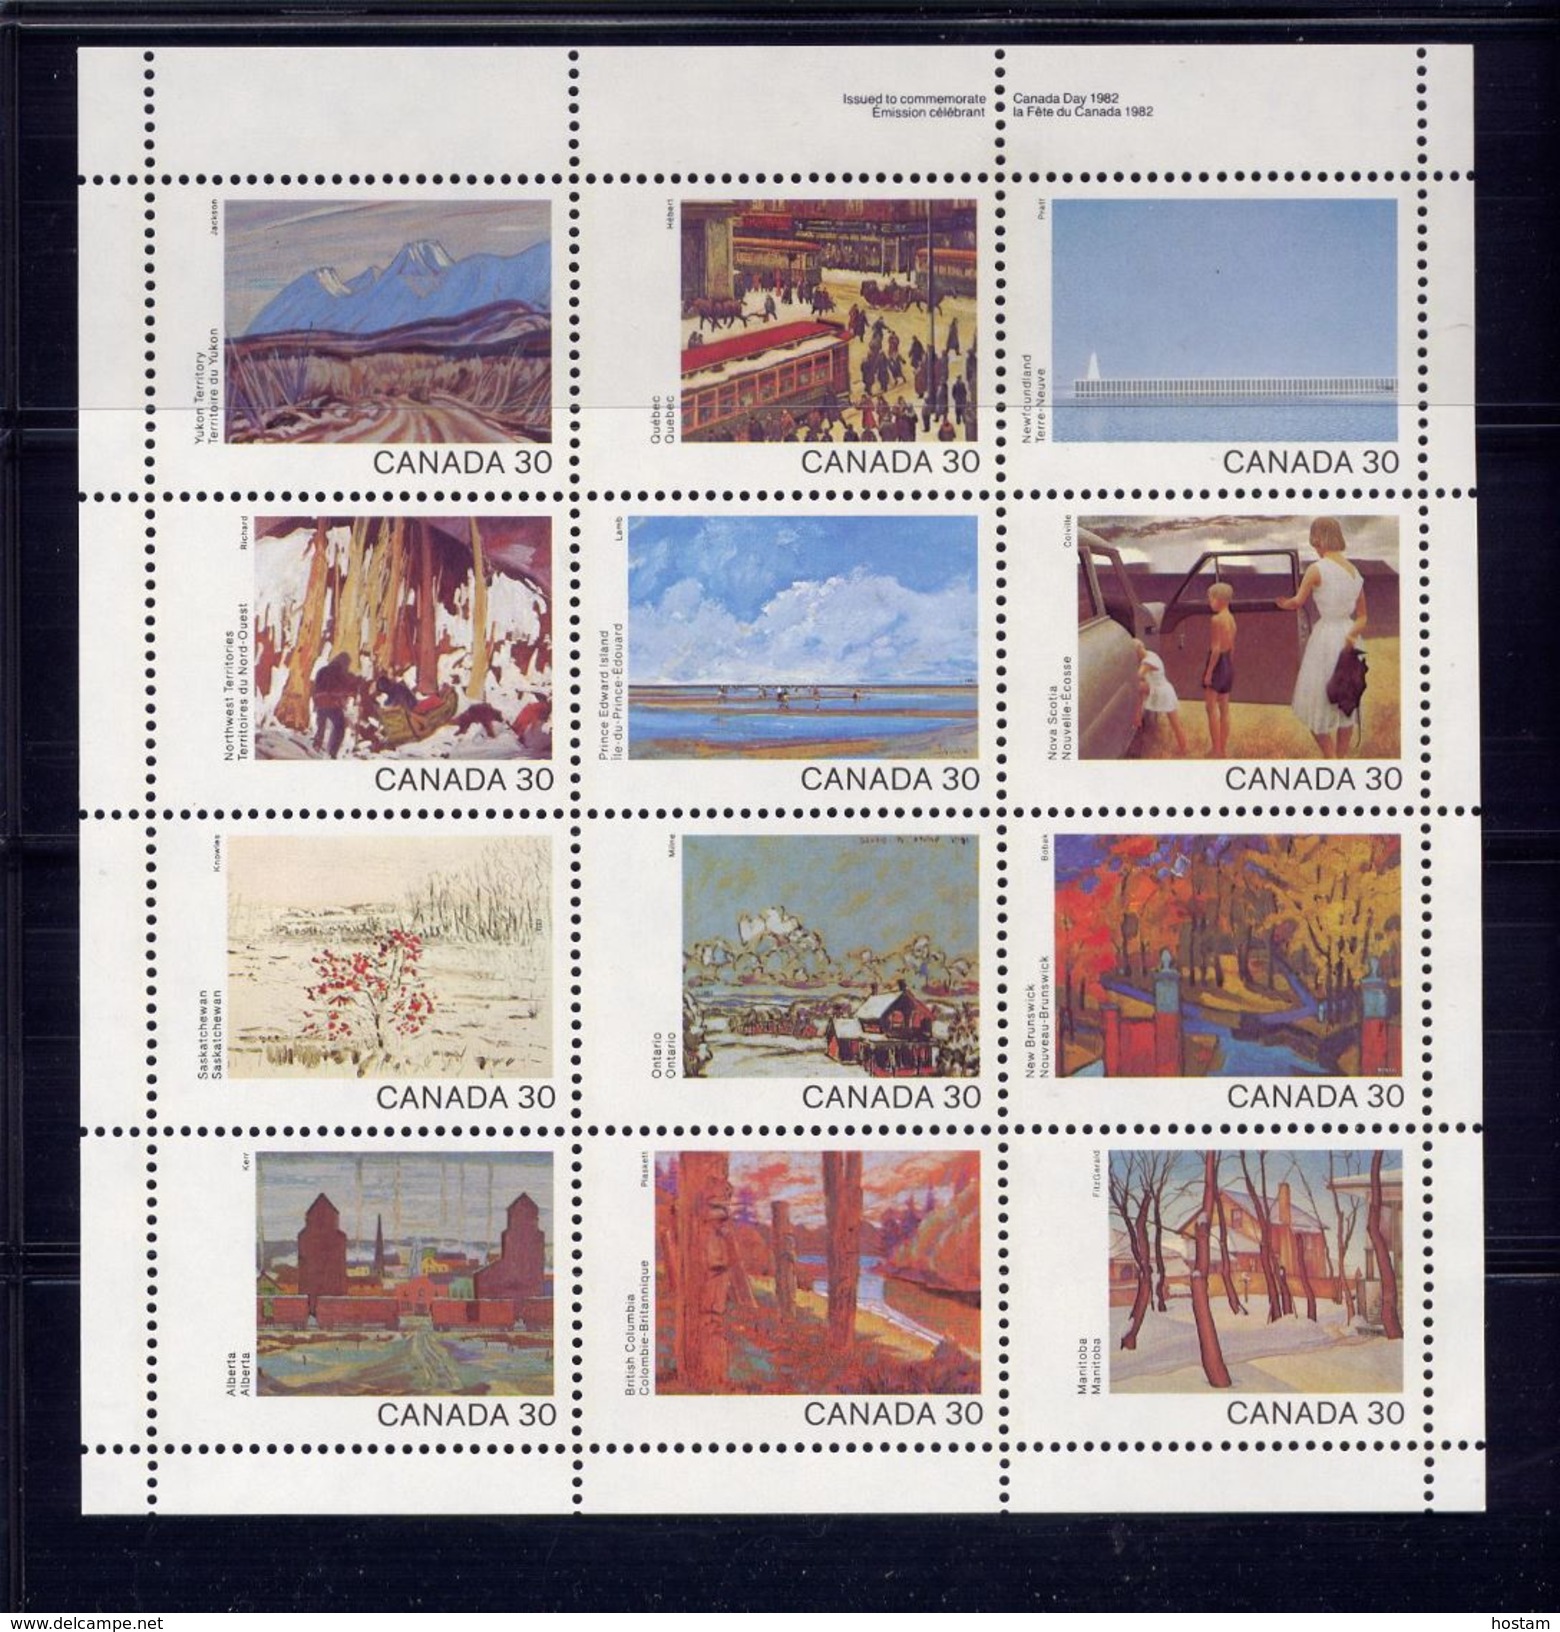 CANADA, 1982, # 966a, UR Narrow.  CANADA DAY,  MNH  12 Stamps - Blocks & Sheetlets